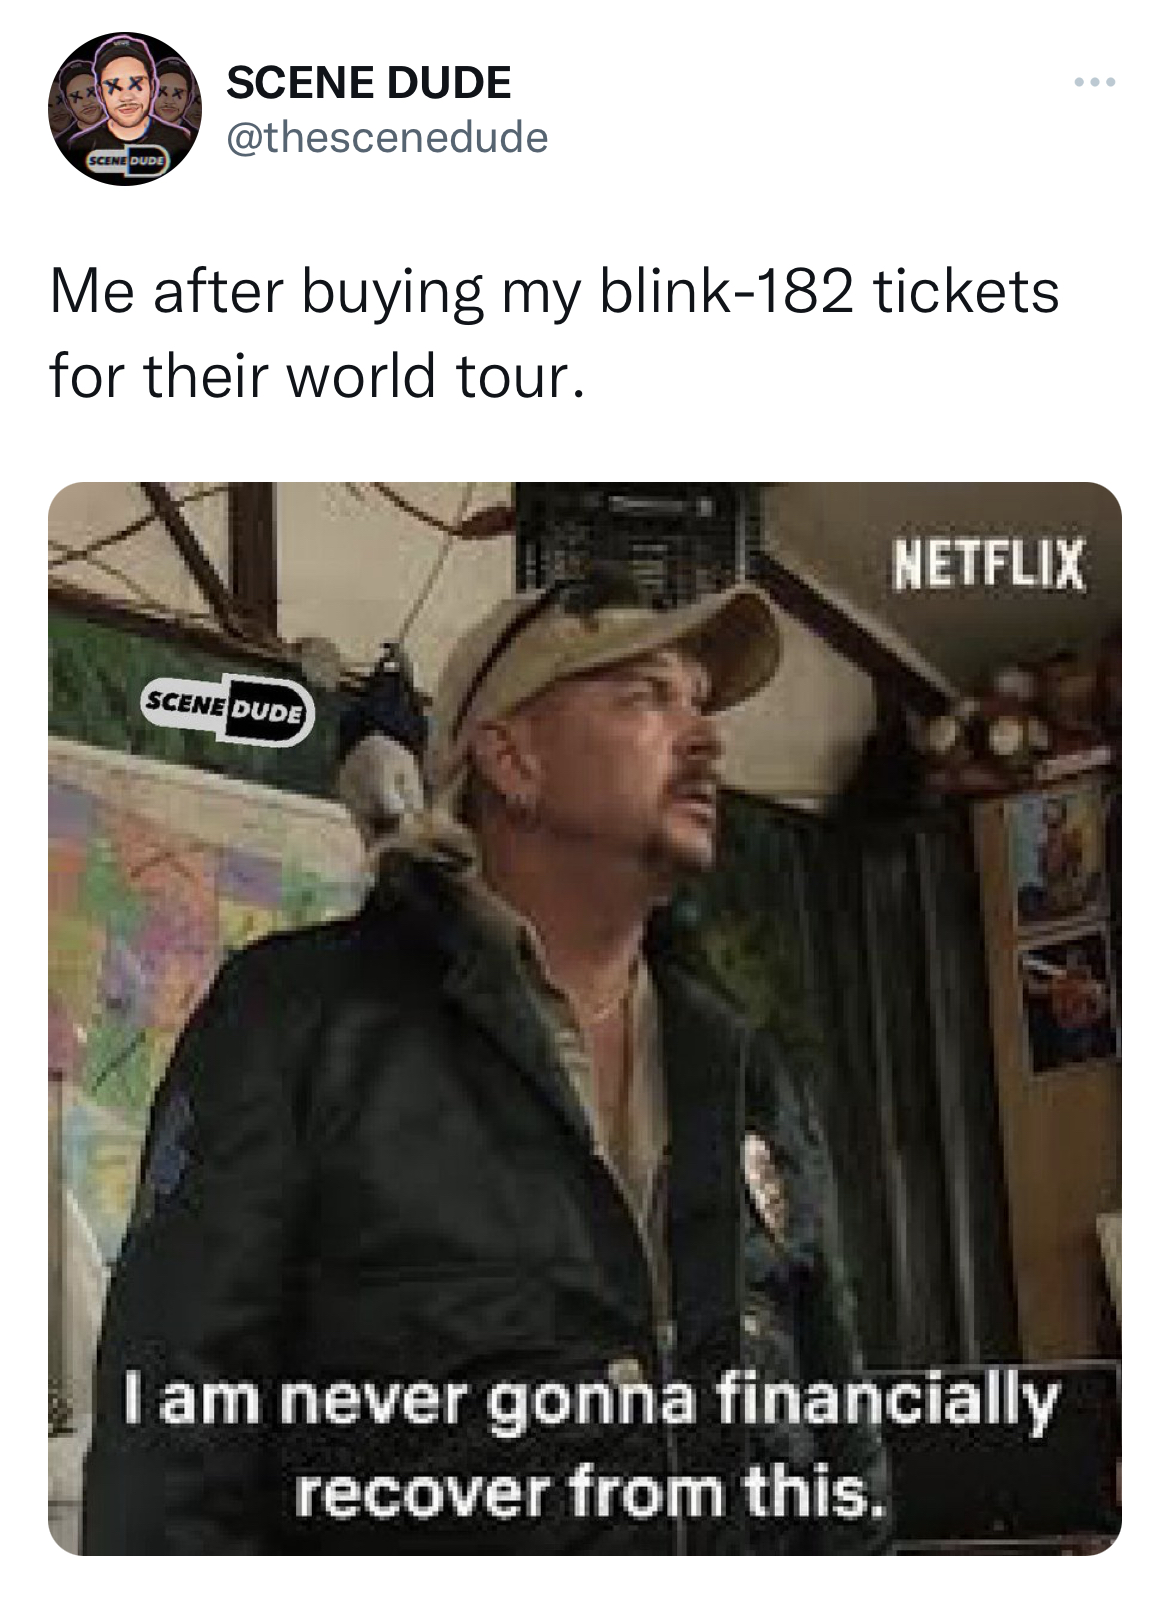 Savage Tweets - photo caption - cene Dude Me after buying my blink182 tickets for their world tour. Scene Dude Netflix I am never gonna financially recover from this.